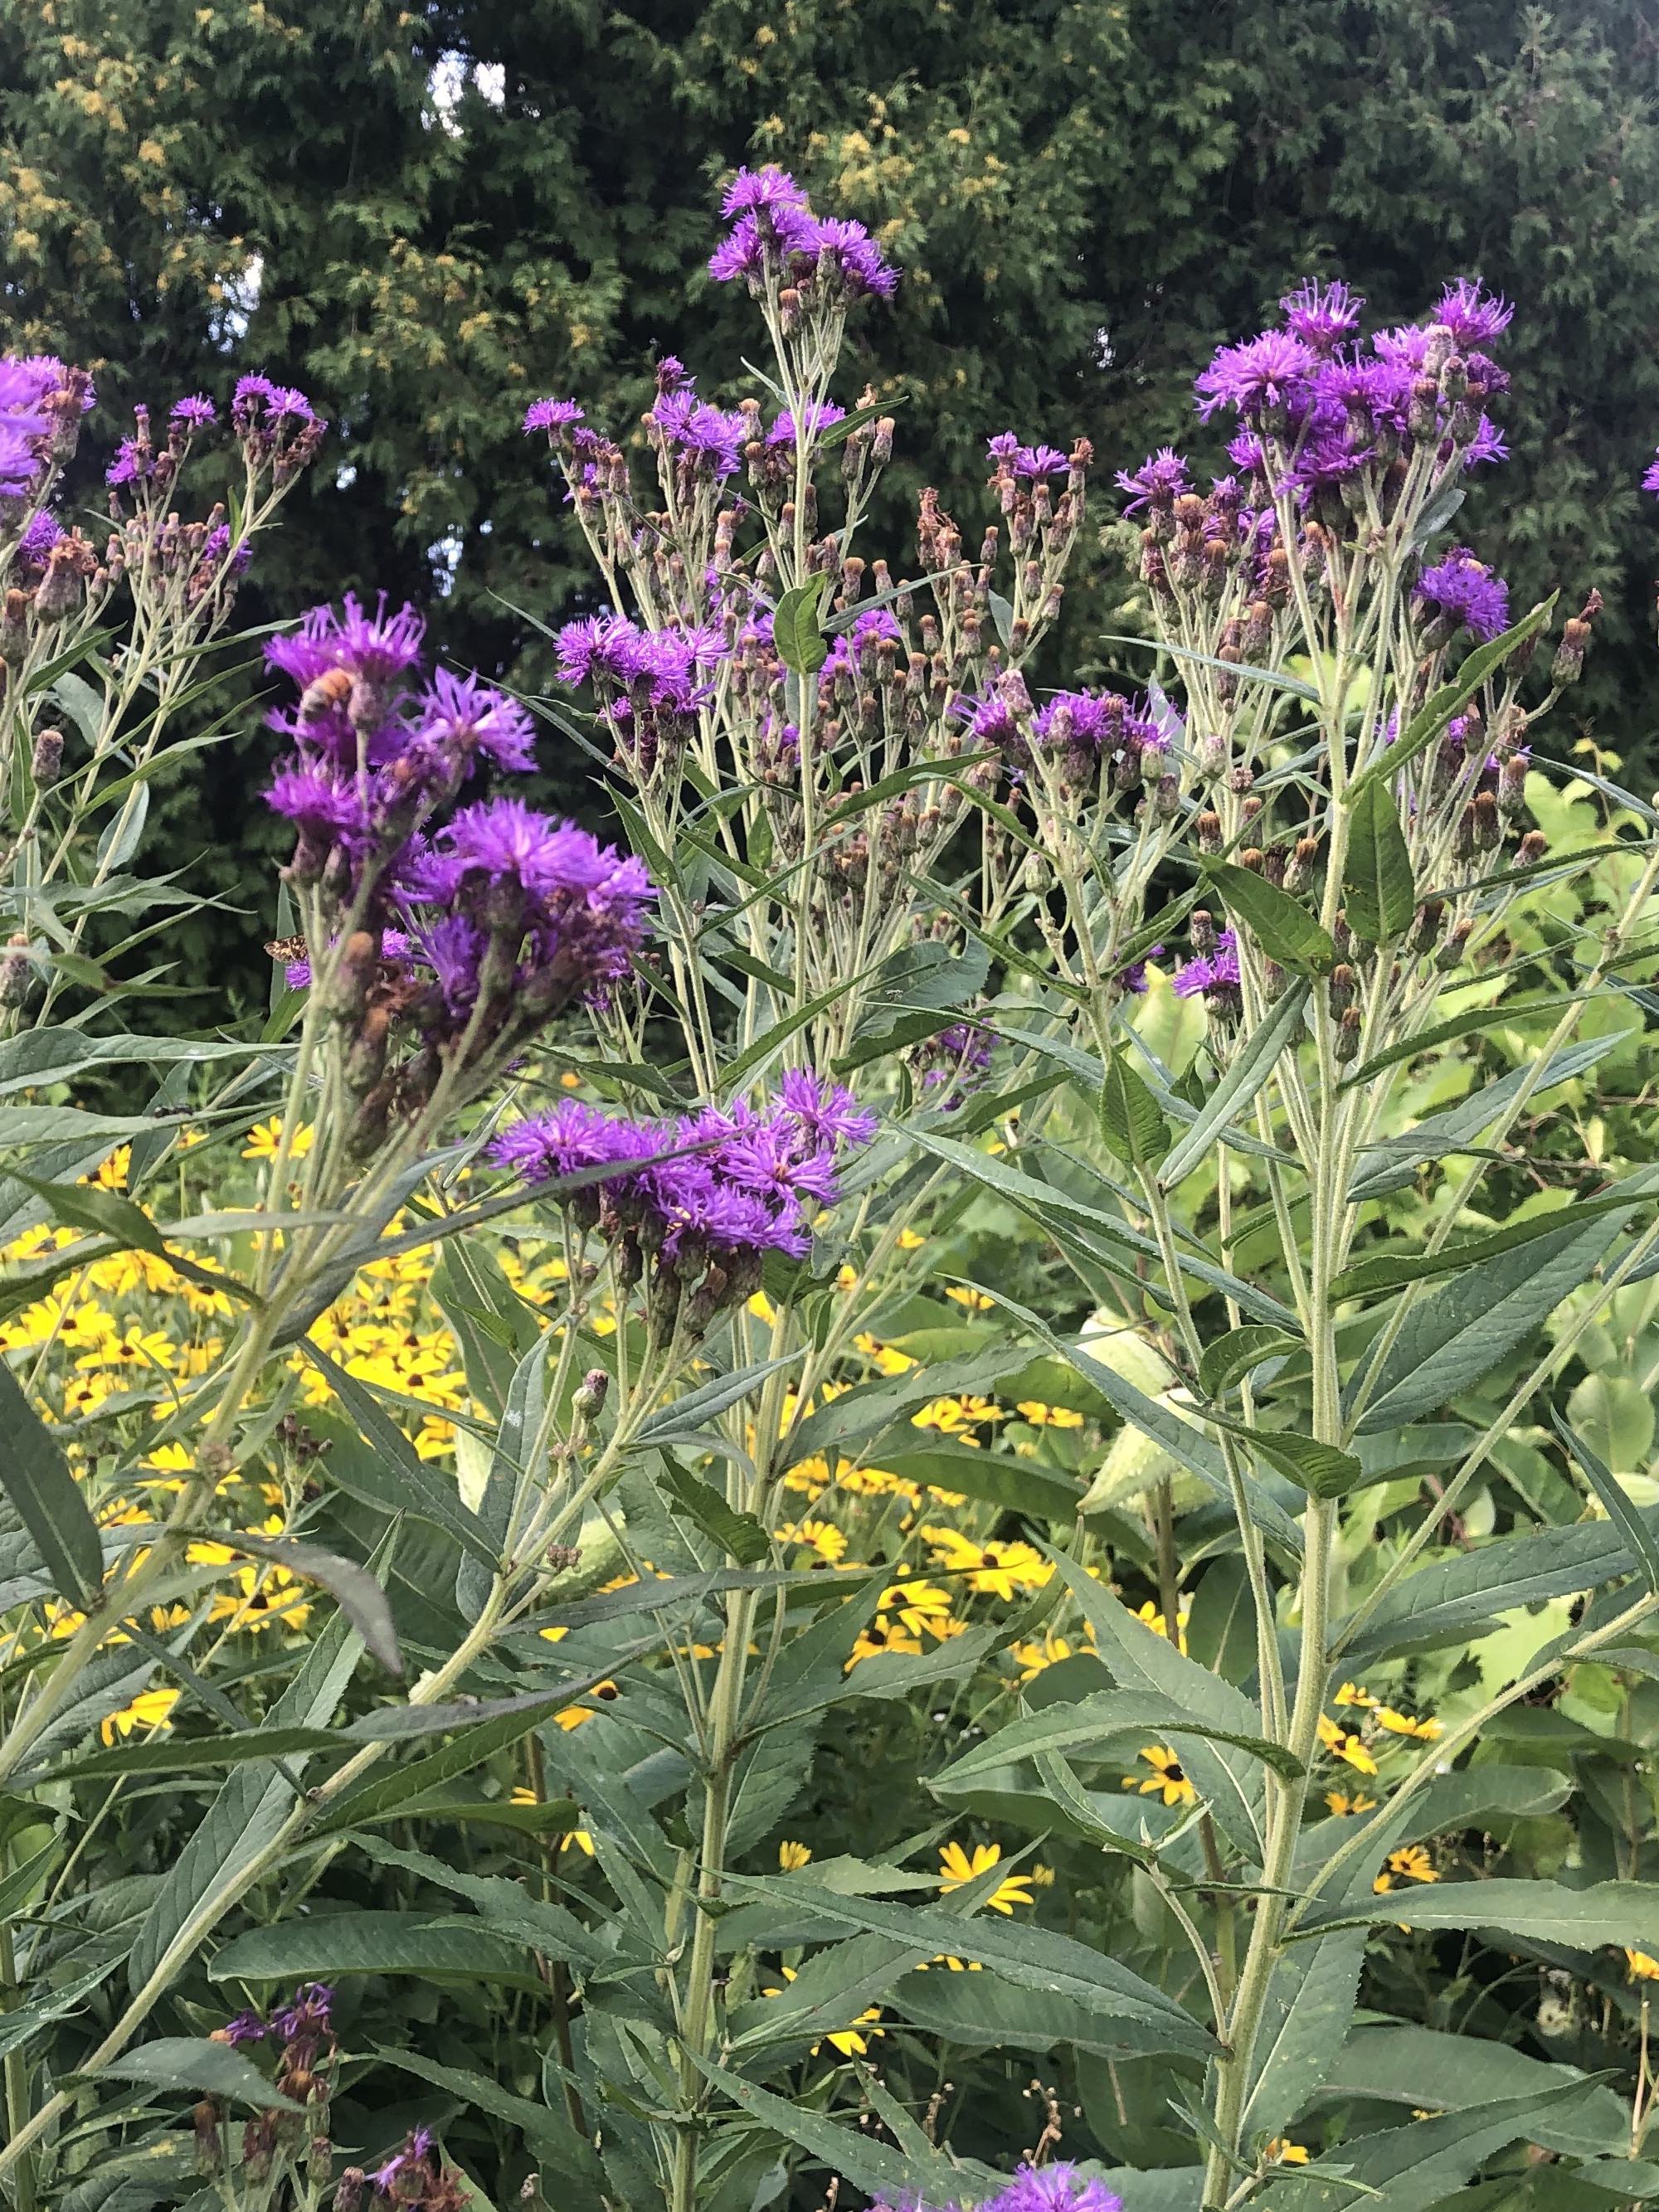 Tall Ironweed along bikepath behind Gregory Street in Madison, Wisconsin on August 2, 2021.